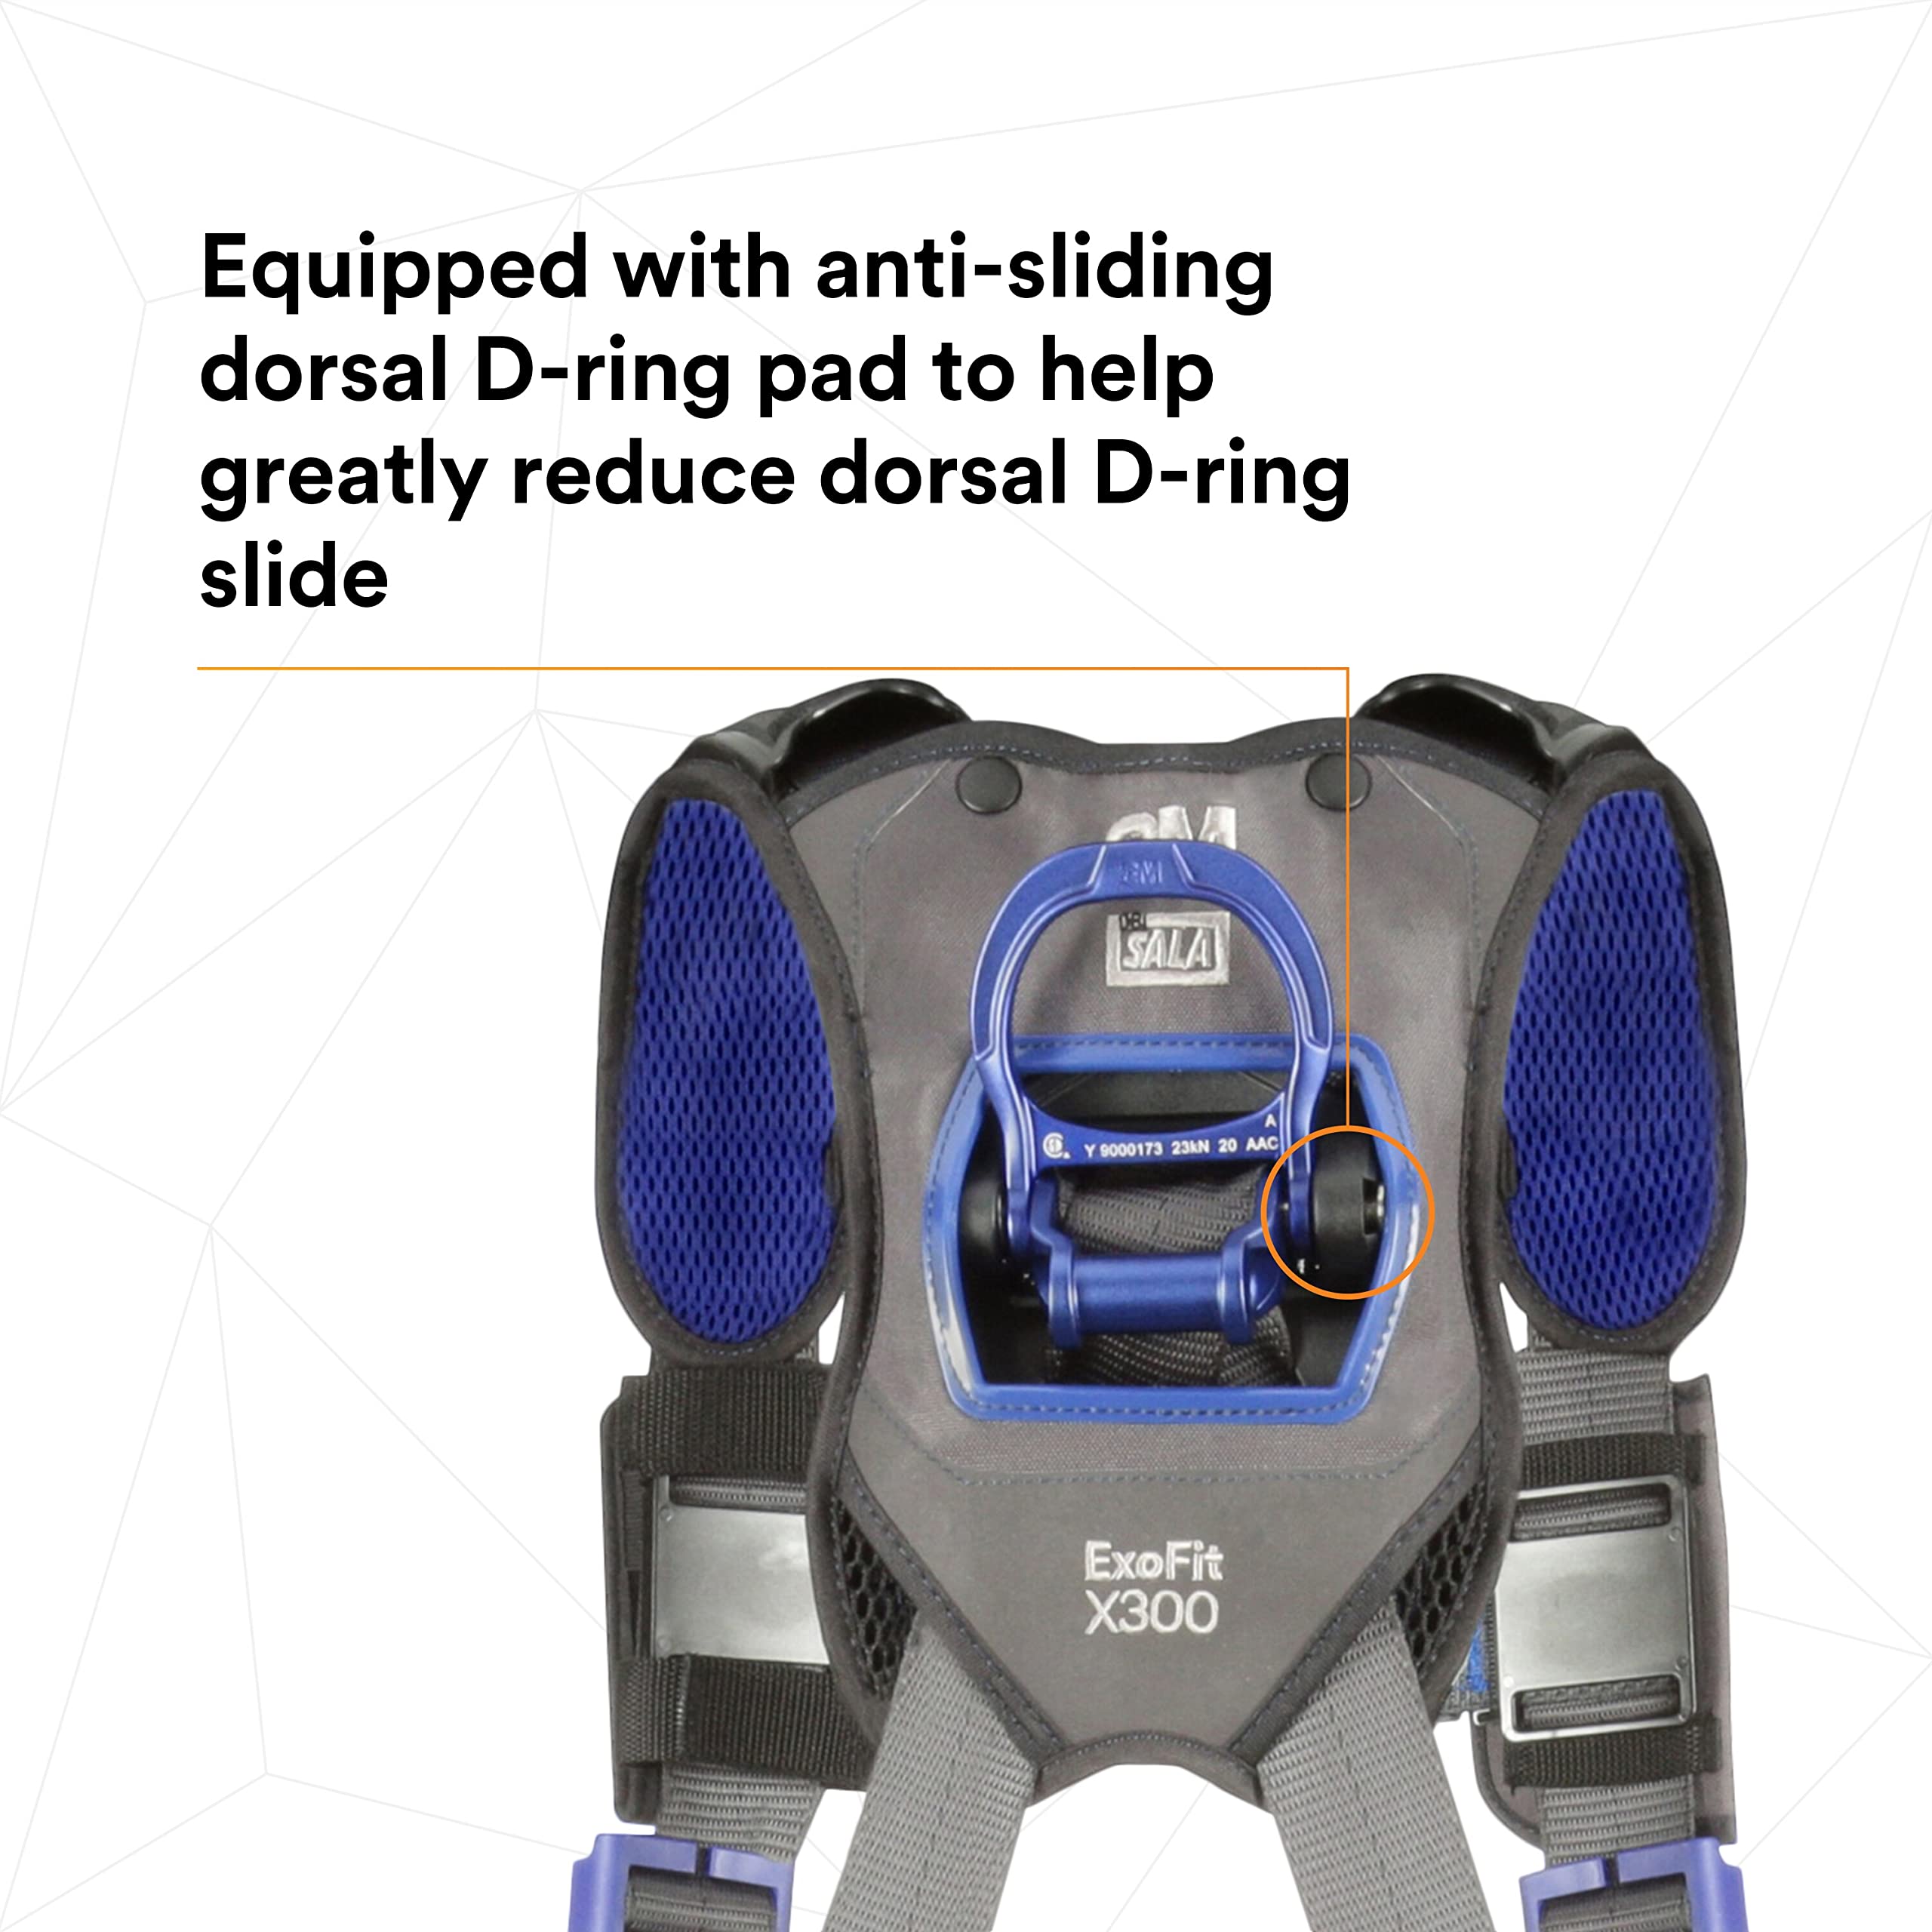 3M 1113124 DBI-SALA ExoFit X300 Comfort Construction Positioning Safety Harness, Construction Fall Protection, Aluminum Back and Hip D-Rings, Auto-Locking Quick Connect Leg and Chest Buckles, Medium